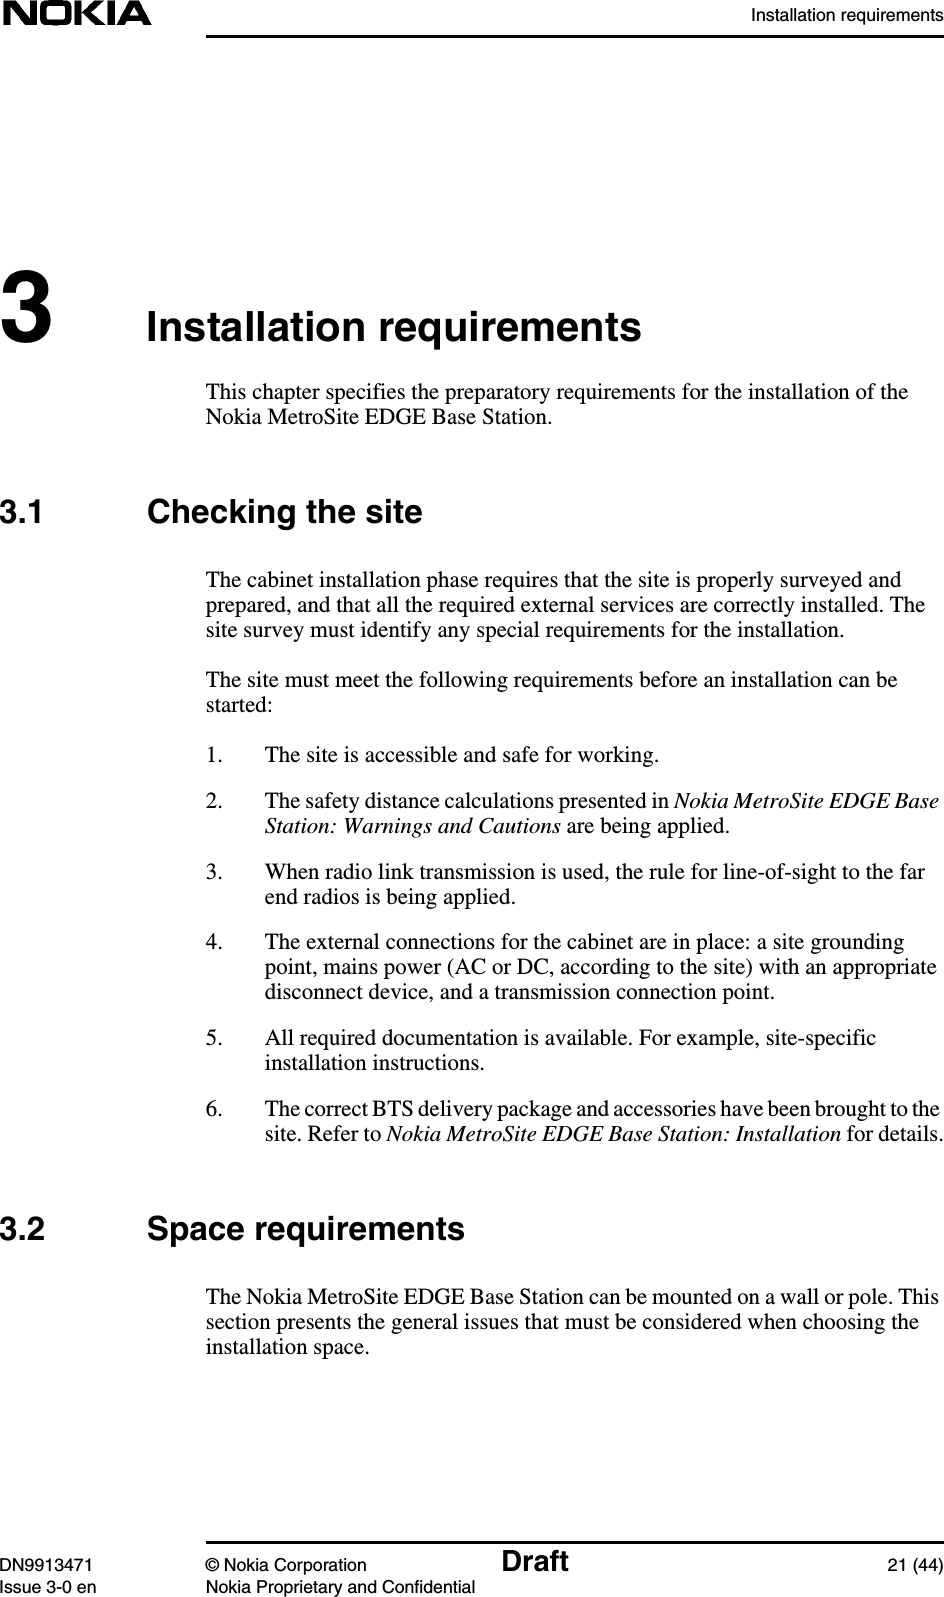 Installation requirementsDN9913471 © Nokia Corporation Draft 21 (44)Issue 3-0 en Nokia Proprietary and Confidential3Installation requirementsThis chapter specifies the preparatory requirements for the installation of theNokia MetroSite EDGE Base Station.3.1 Checking the siteThe cabinet installation phase requires that the site is properly surveyed andprepared, and that all the required external services are correctly installed. Thesite survey must identify any special requirements for the installation.The site must meet the following requirements before an installation can bestarted:1. The site is accessible and safe for working.2. The safety distance calculations presented in Nokia MetroSite EDGE BaseStation: Warnings and Cautions are being applied.3. When radio link transmission is used, the rule for line-of-sight to the farend radios is being applied.4. The external connections for the cabinet are in place: a site groundingpoint, mains power (AC or DC, according to the site) with an appropriatedisconnect device, and a transmission connection point.5. All required documentation is available. For example, site-specificinstallation instructions.6. The correct BTS delivery package and accessories have been brought to thesite. Refer to Nokia MetroSite EDGE Base Station: Installation for details.3.2 Space requirementsThe Nokia MetroSite EDGE Base Station can be mounted on a wall or pole. Thissection presents the general issues that must be considered when choosing theinstallation space.